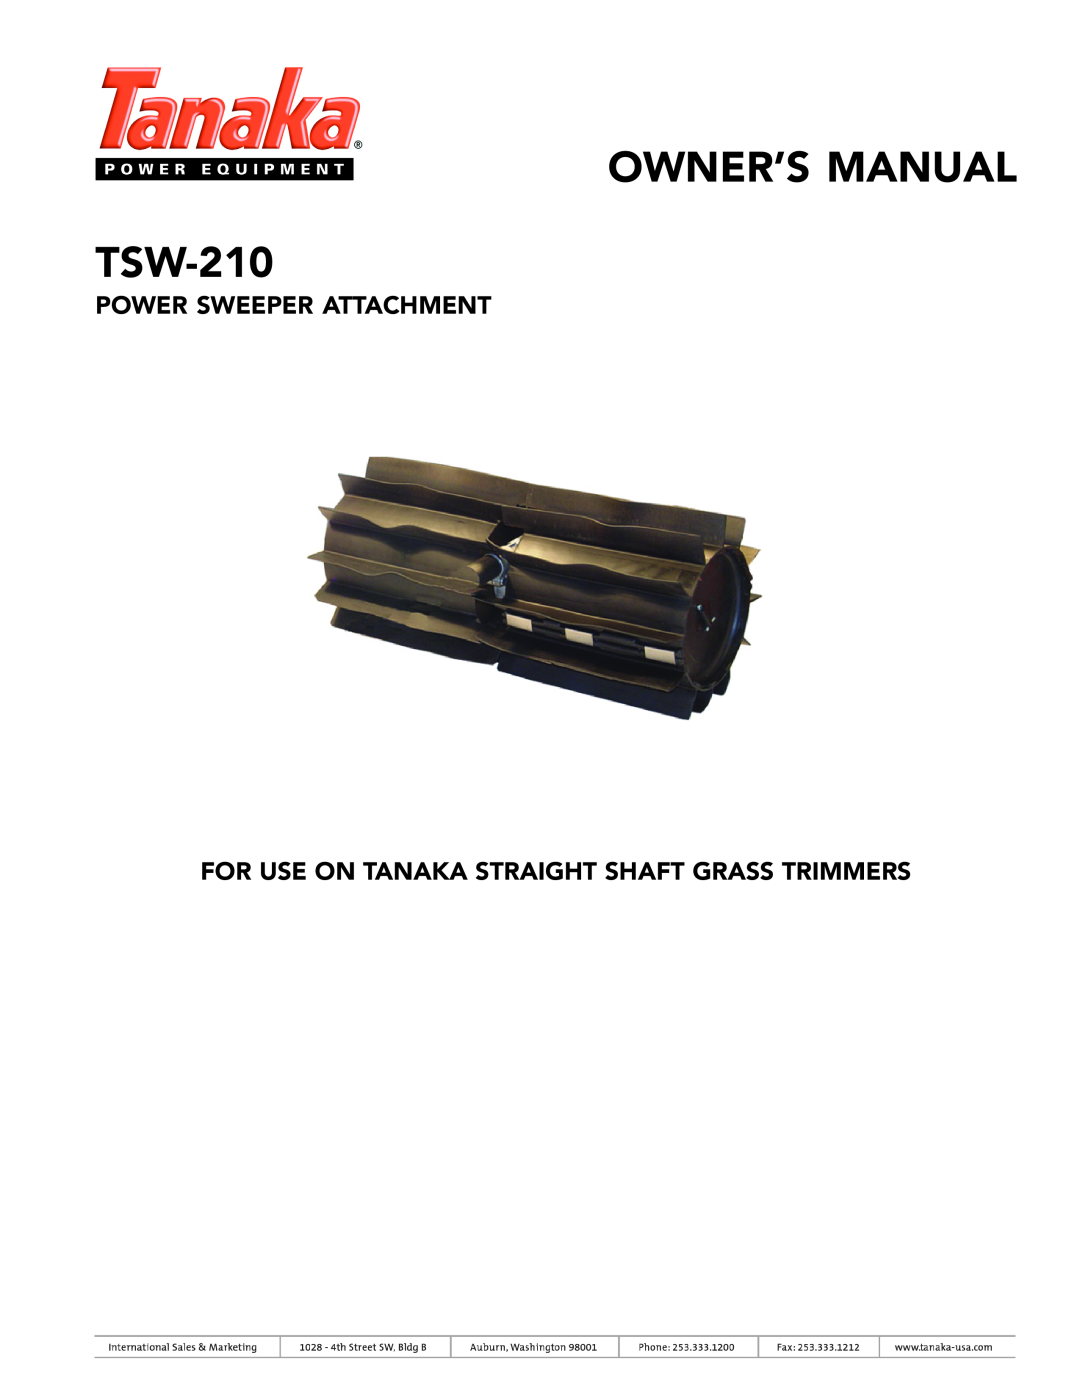 Tanaka TSW-210 manual TWS-210, Model Number, Date, Illustrated Parts Manual, Power Sweeper Attachment 